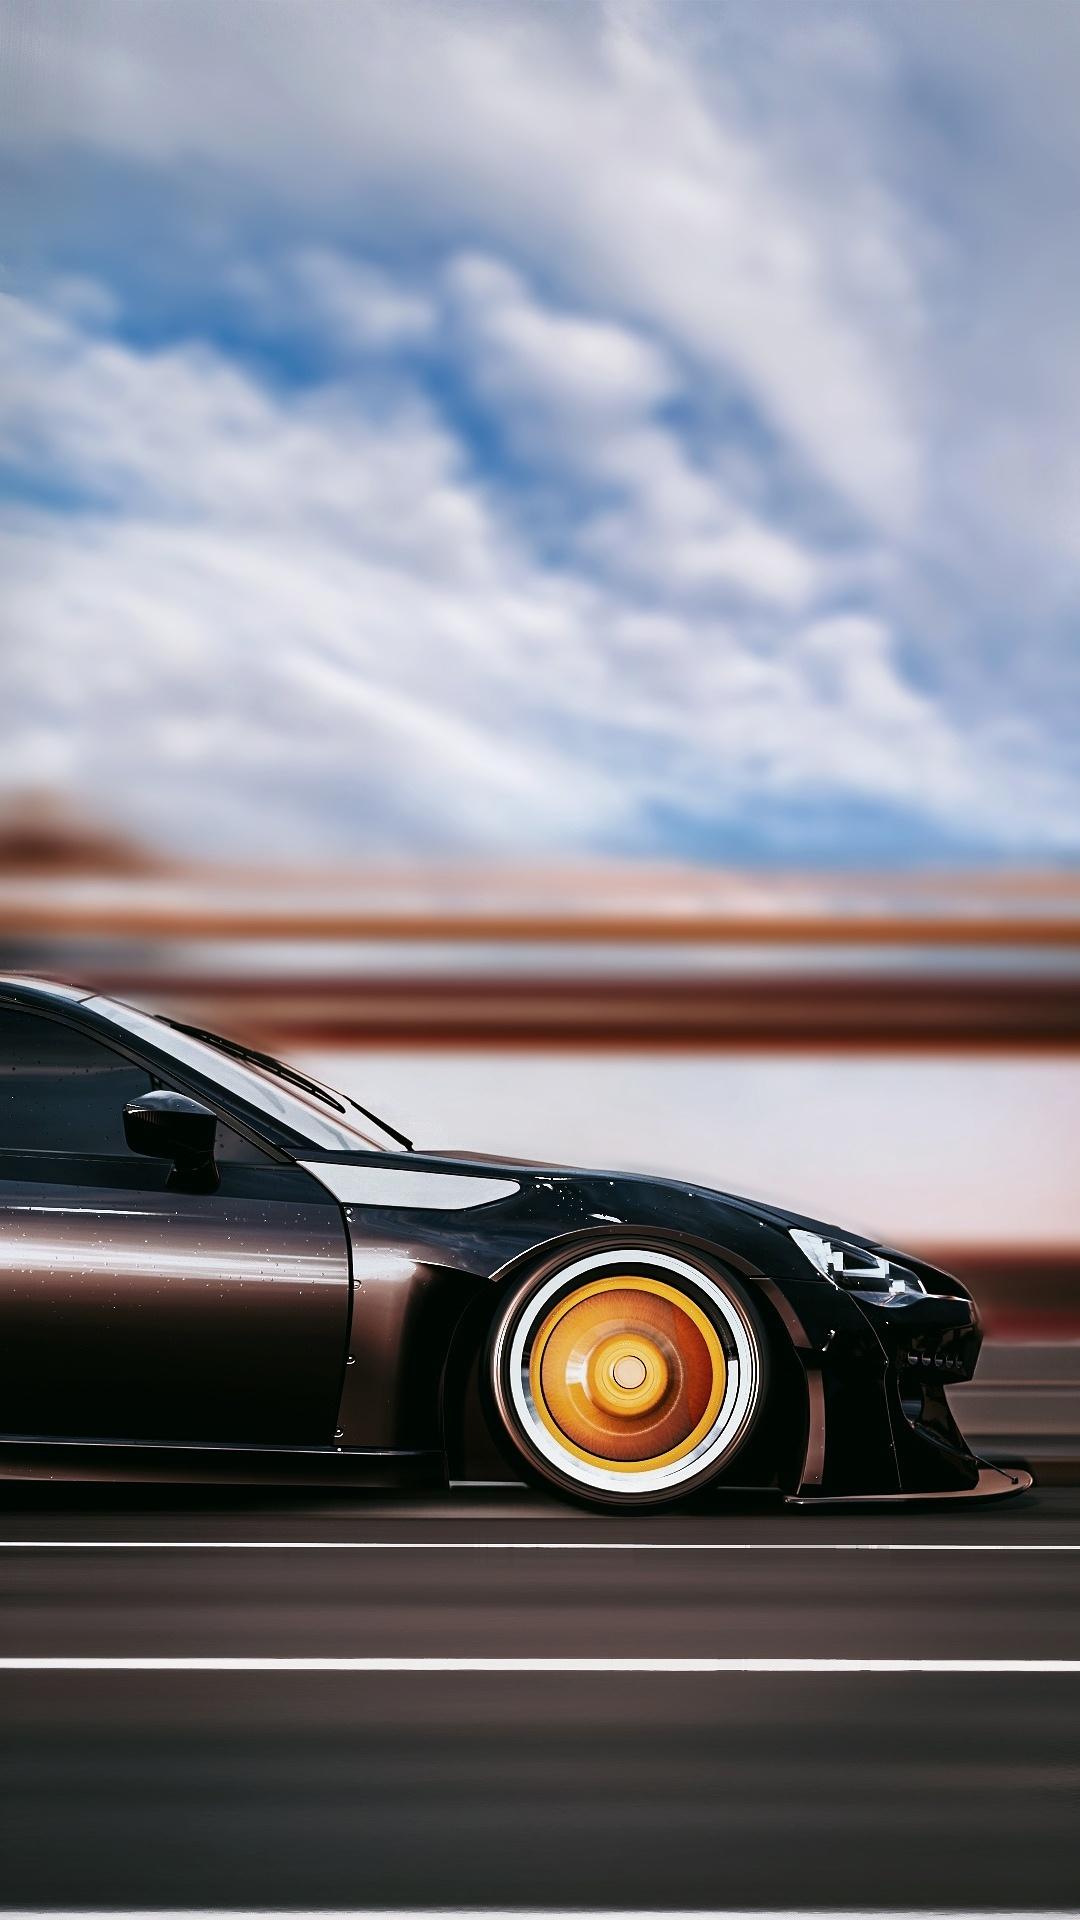 Subaru Brz Iphone Wallpapers posted by Michelle Anderson